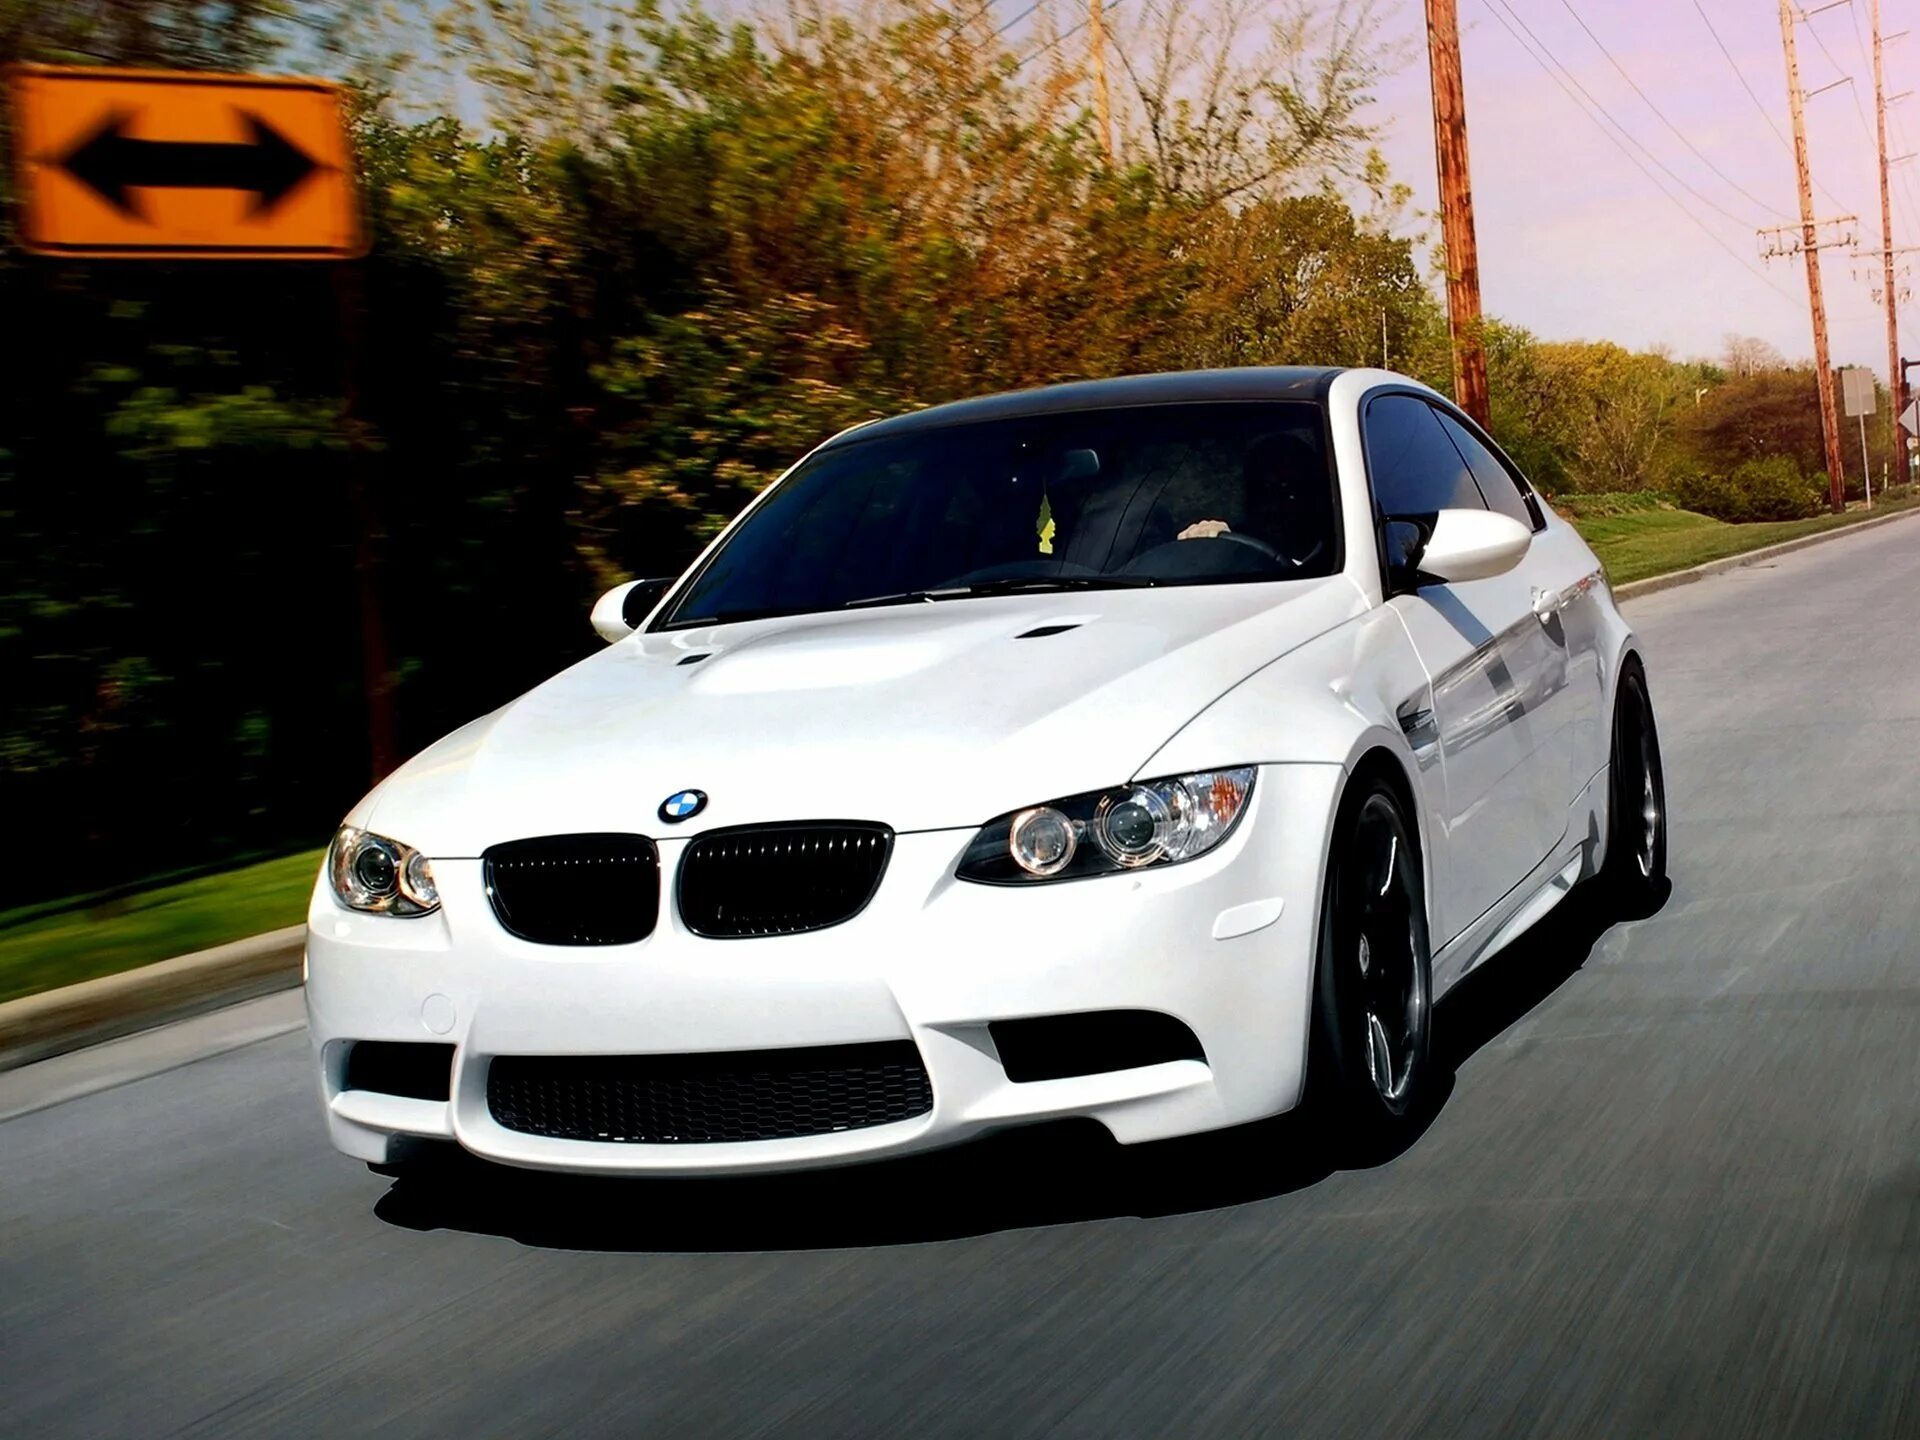 BMW m3 e92 White. BMW m3 520i. BMW e92 Coupe белая. BMW m3 Coupe 2011.